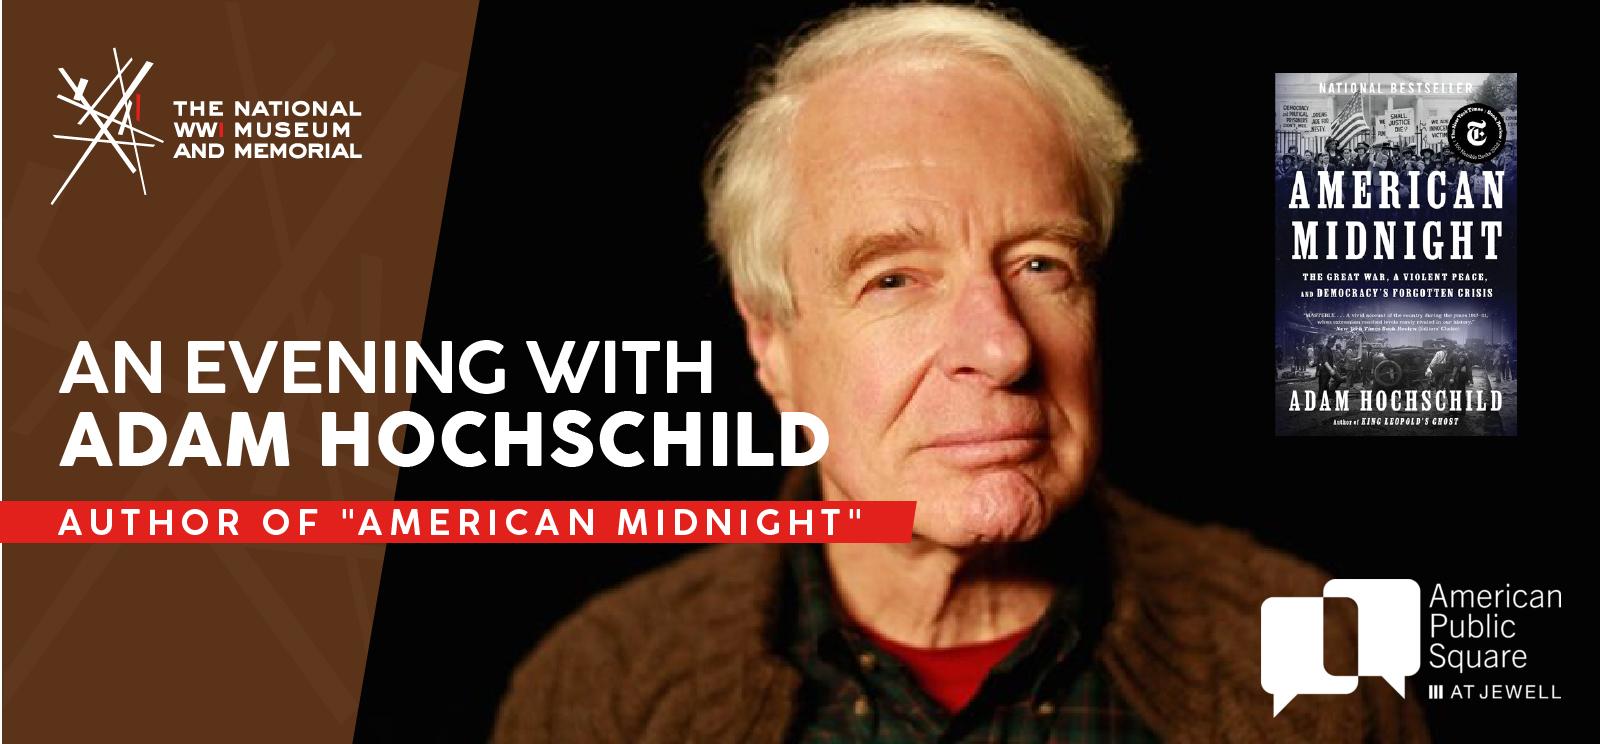 Image: Modern headshot of an older white man with white hair looking seriously at the viewer. A blue and white book cover titled 'American Midnight' is superimposed on the bottom right. Text: 'An Evening with Adam Hochschild / Author of "American Midnight"